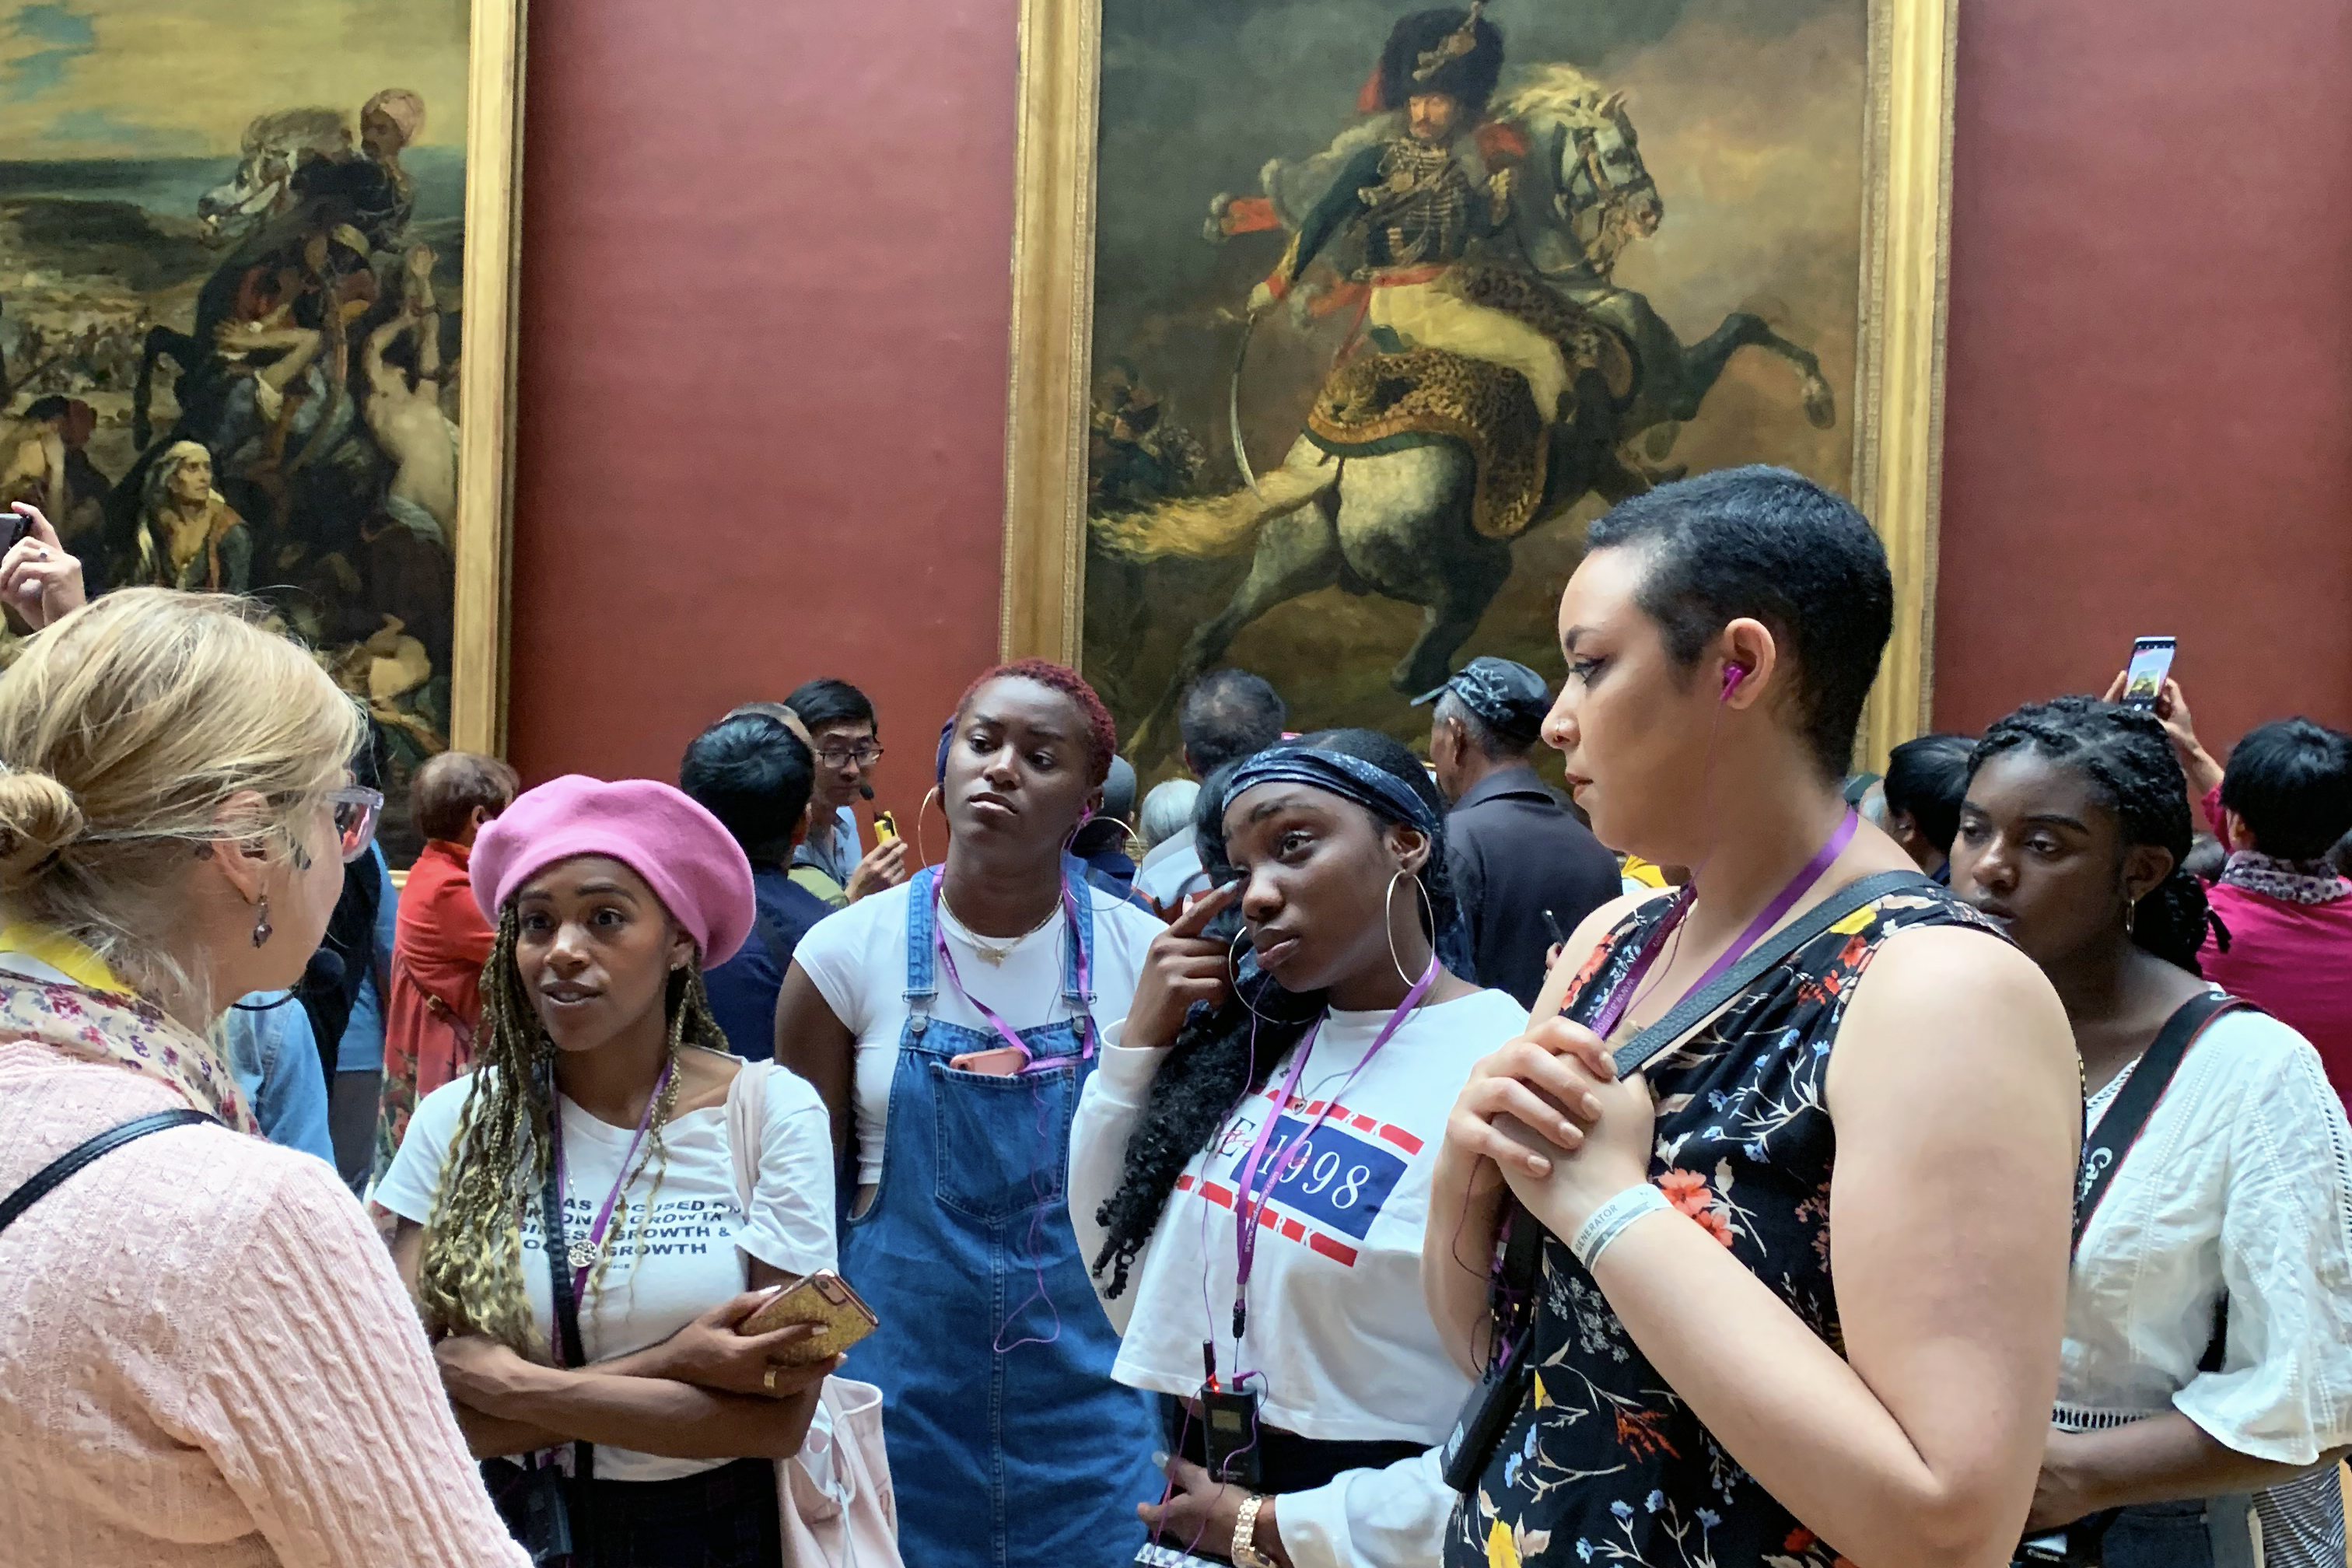 WGSS students tour the Louvre in Paris